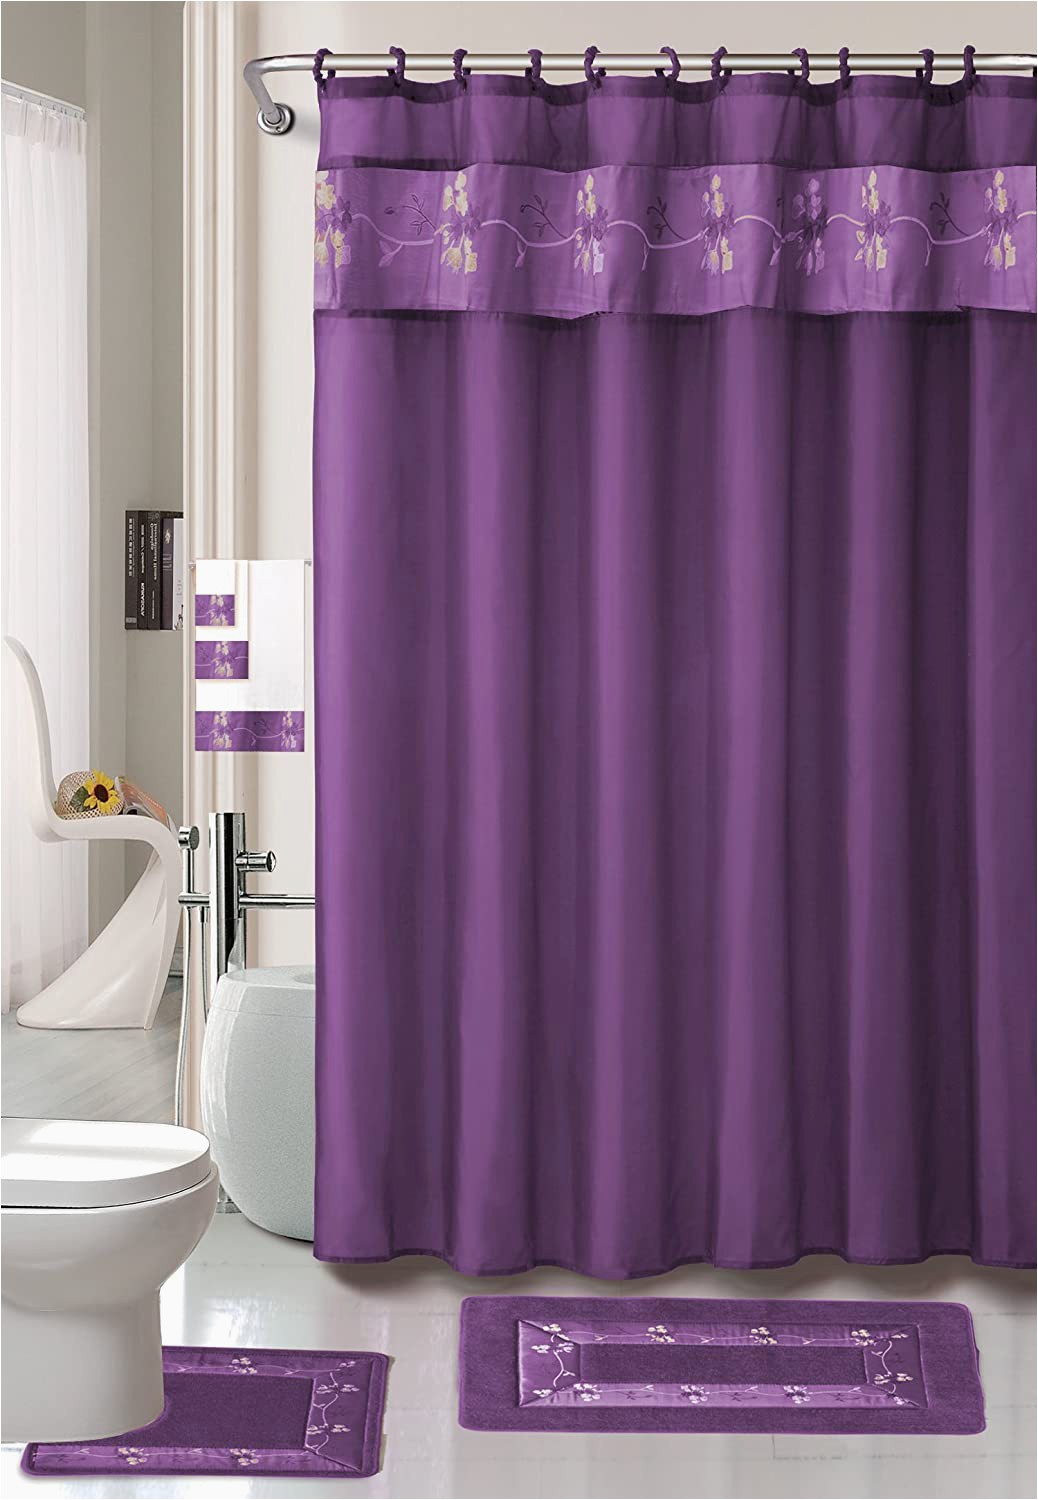 Purple Bathroom Rugs and towels Ahf Wpm Beverly Purple Flower 18 Piece Bathroom Set 2 Rugs Mats 1 Fabric Shower Curtain 12 Fabric Covered Rings 3 Pc Decorative towel Set